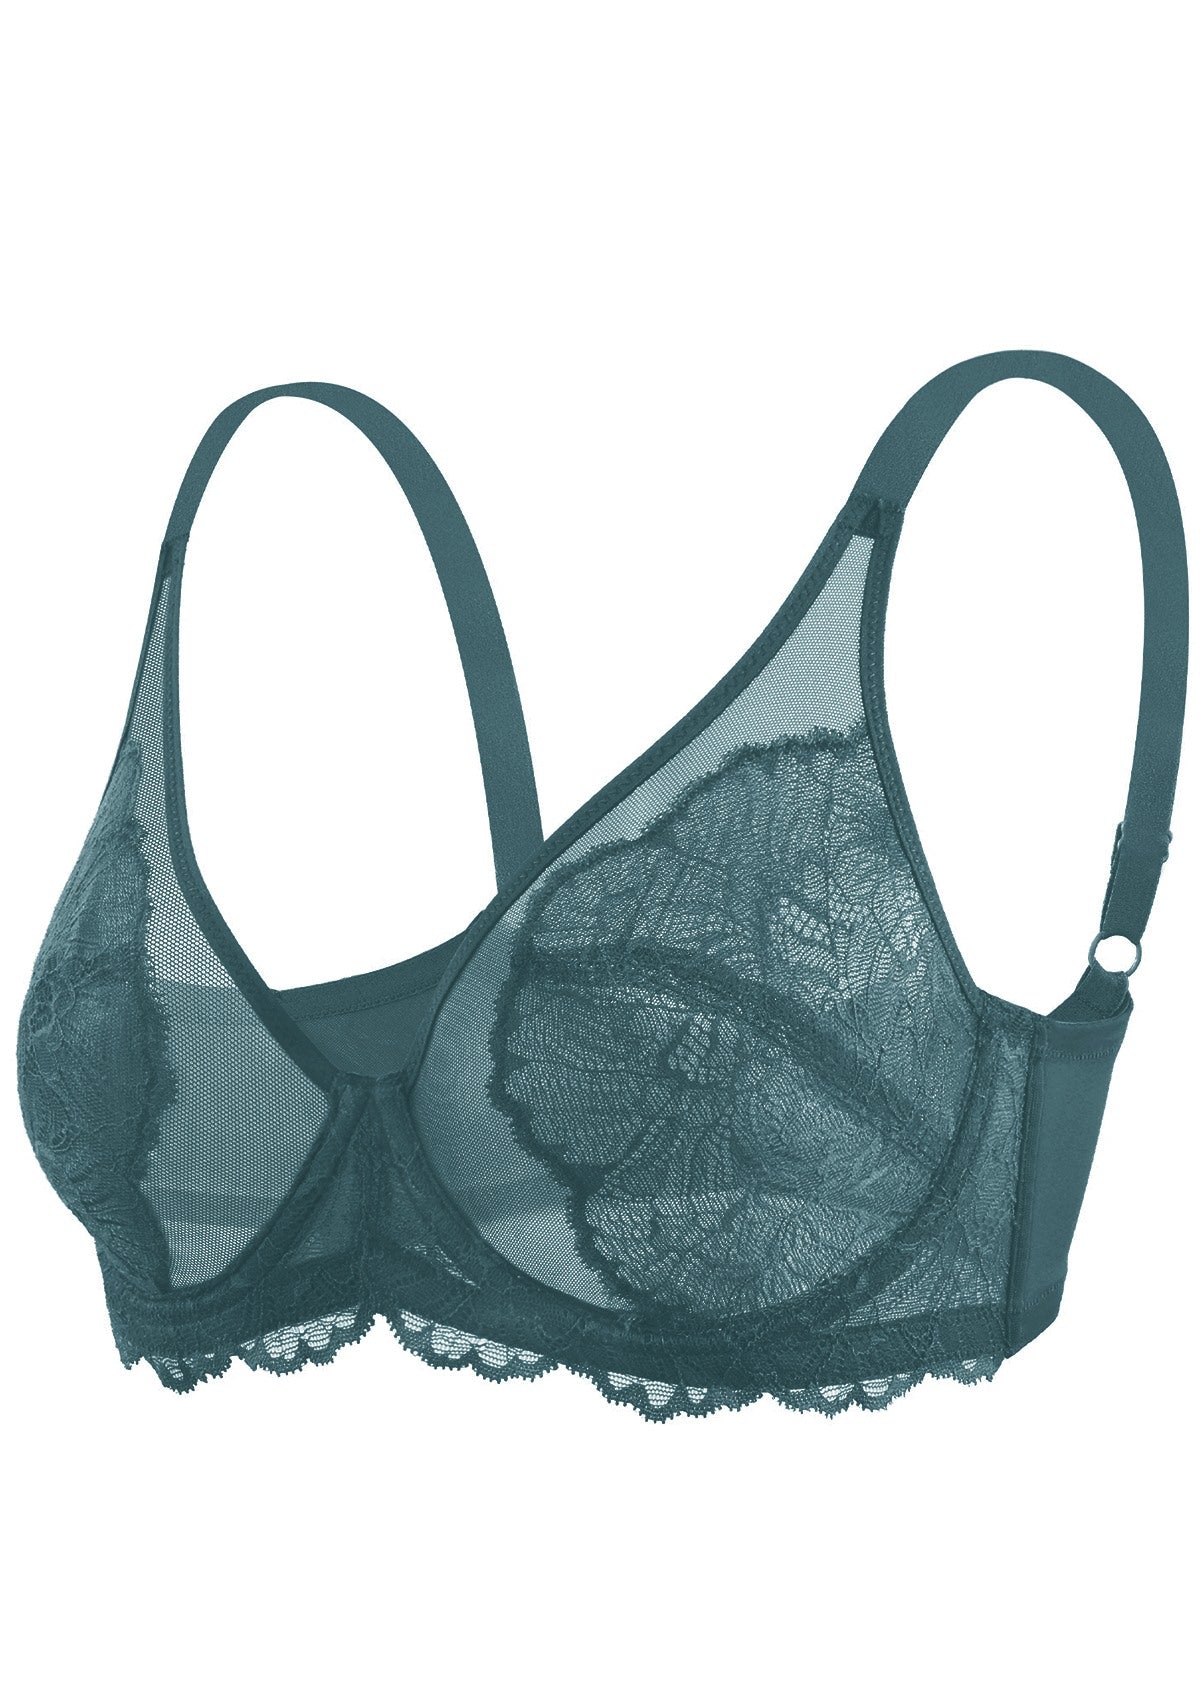 HSIA Blossom Full Figure See-Through Lace Bra For Side And Back Fat - Balsam Blue / 38 / DDD/F